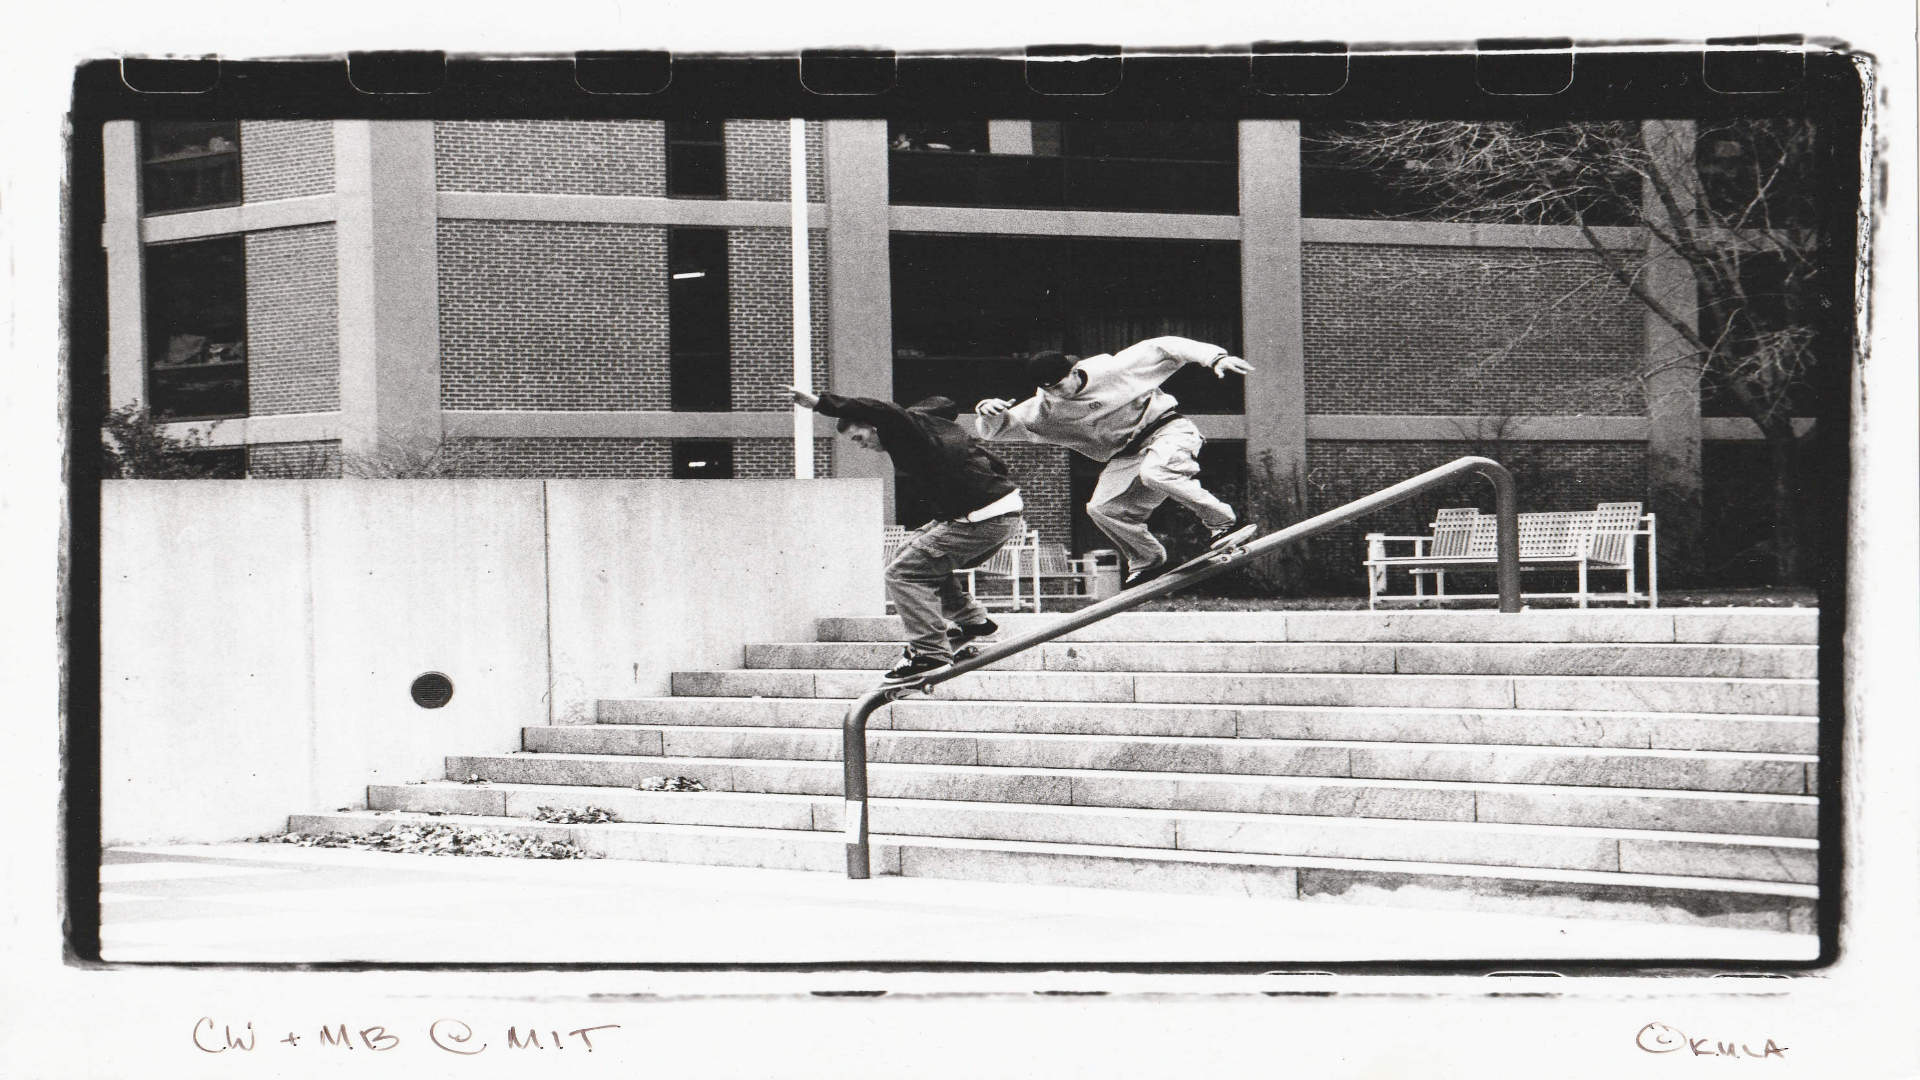 BOSTON - Charlie Wilkins Mike Bell - 1st doubles on a handrail at MIT